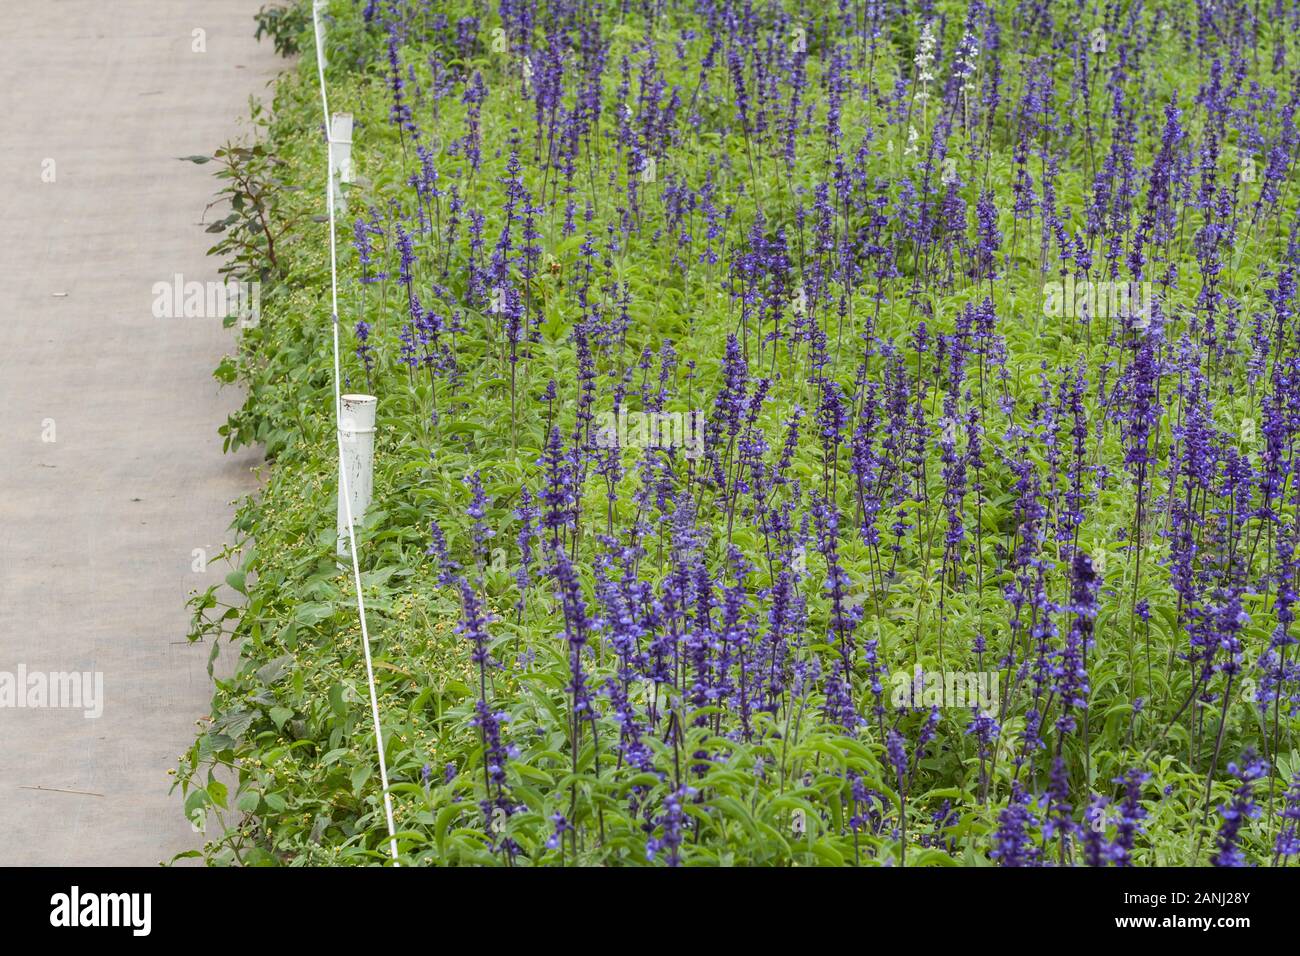 Mealy sage (Salvia farinacea 'Victoria'), aka mealycup sage, intense violet-blue flowers, in a dense stand, Sea of Flowers, Xinshe, Taichung, Taiwan Stock Photo